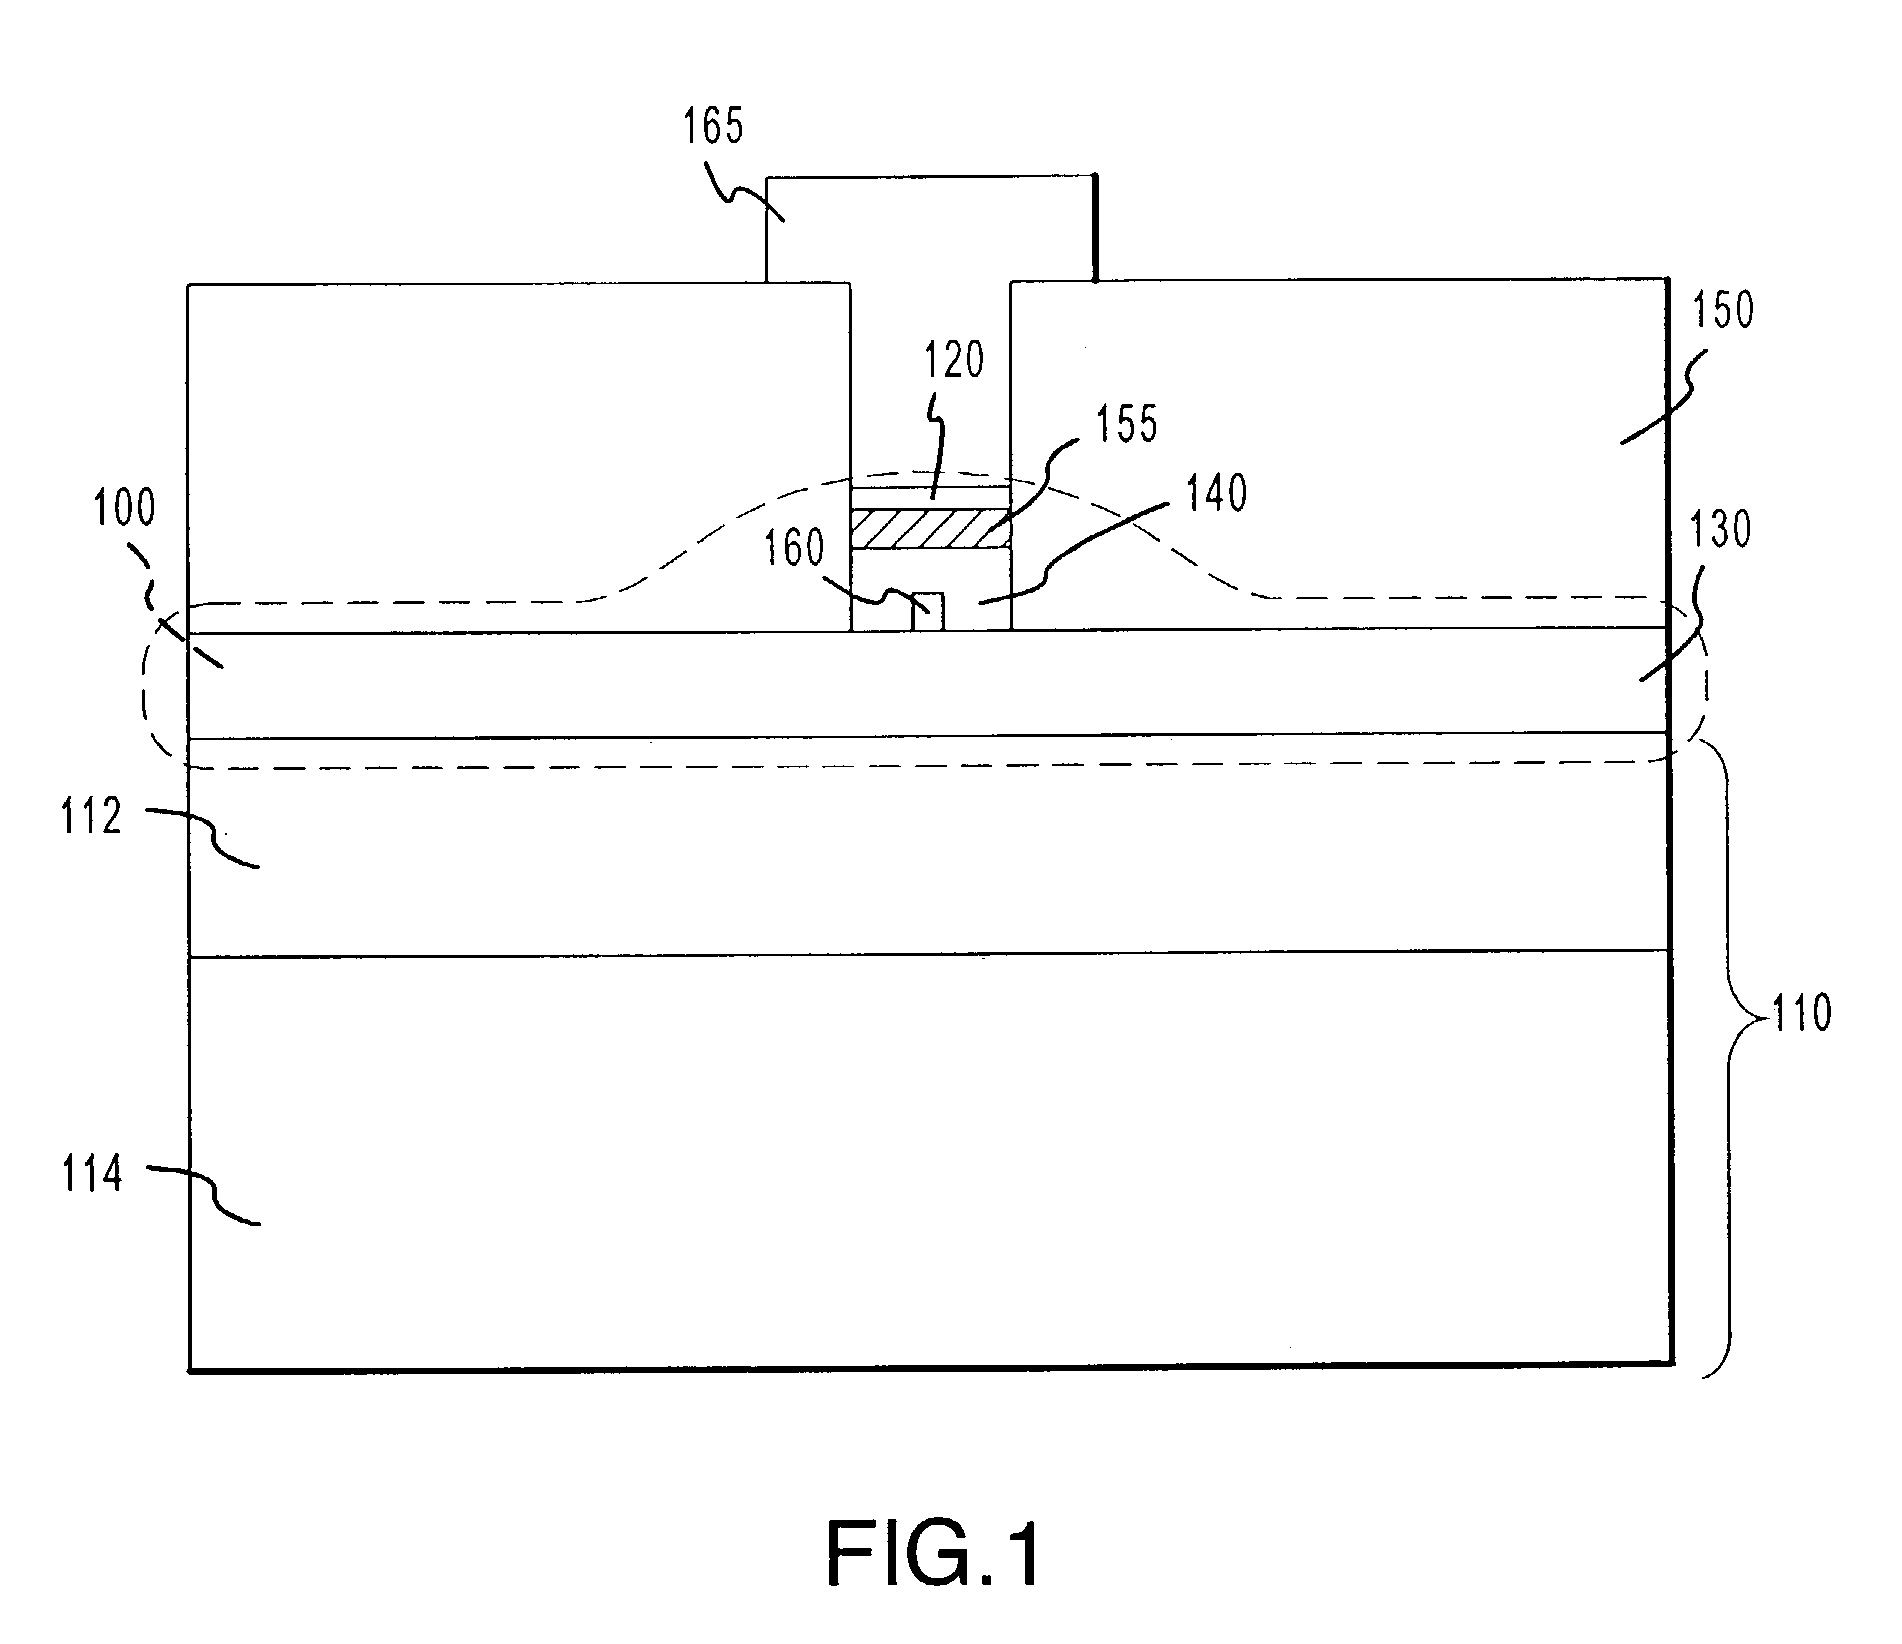 Microelectronic programmable device and methods of forming and programming the same